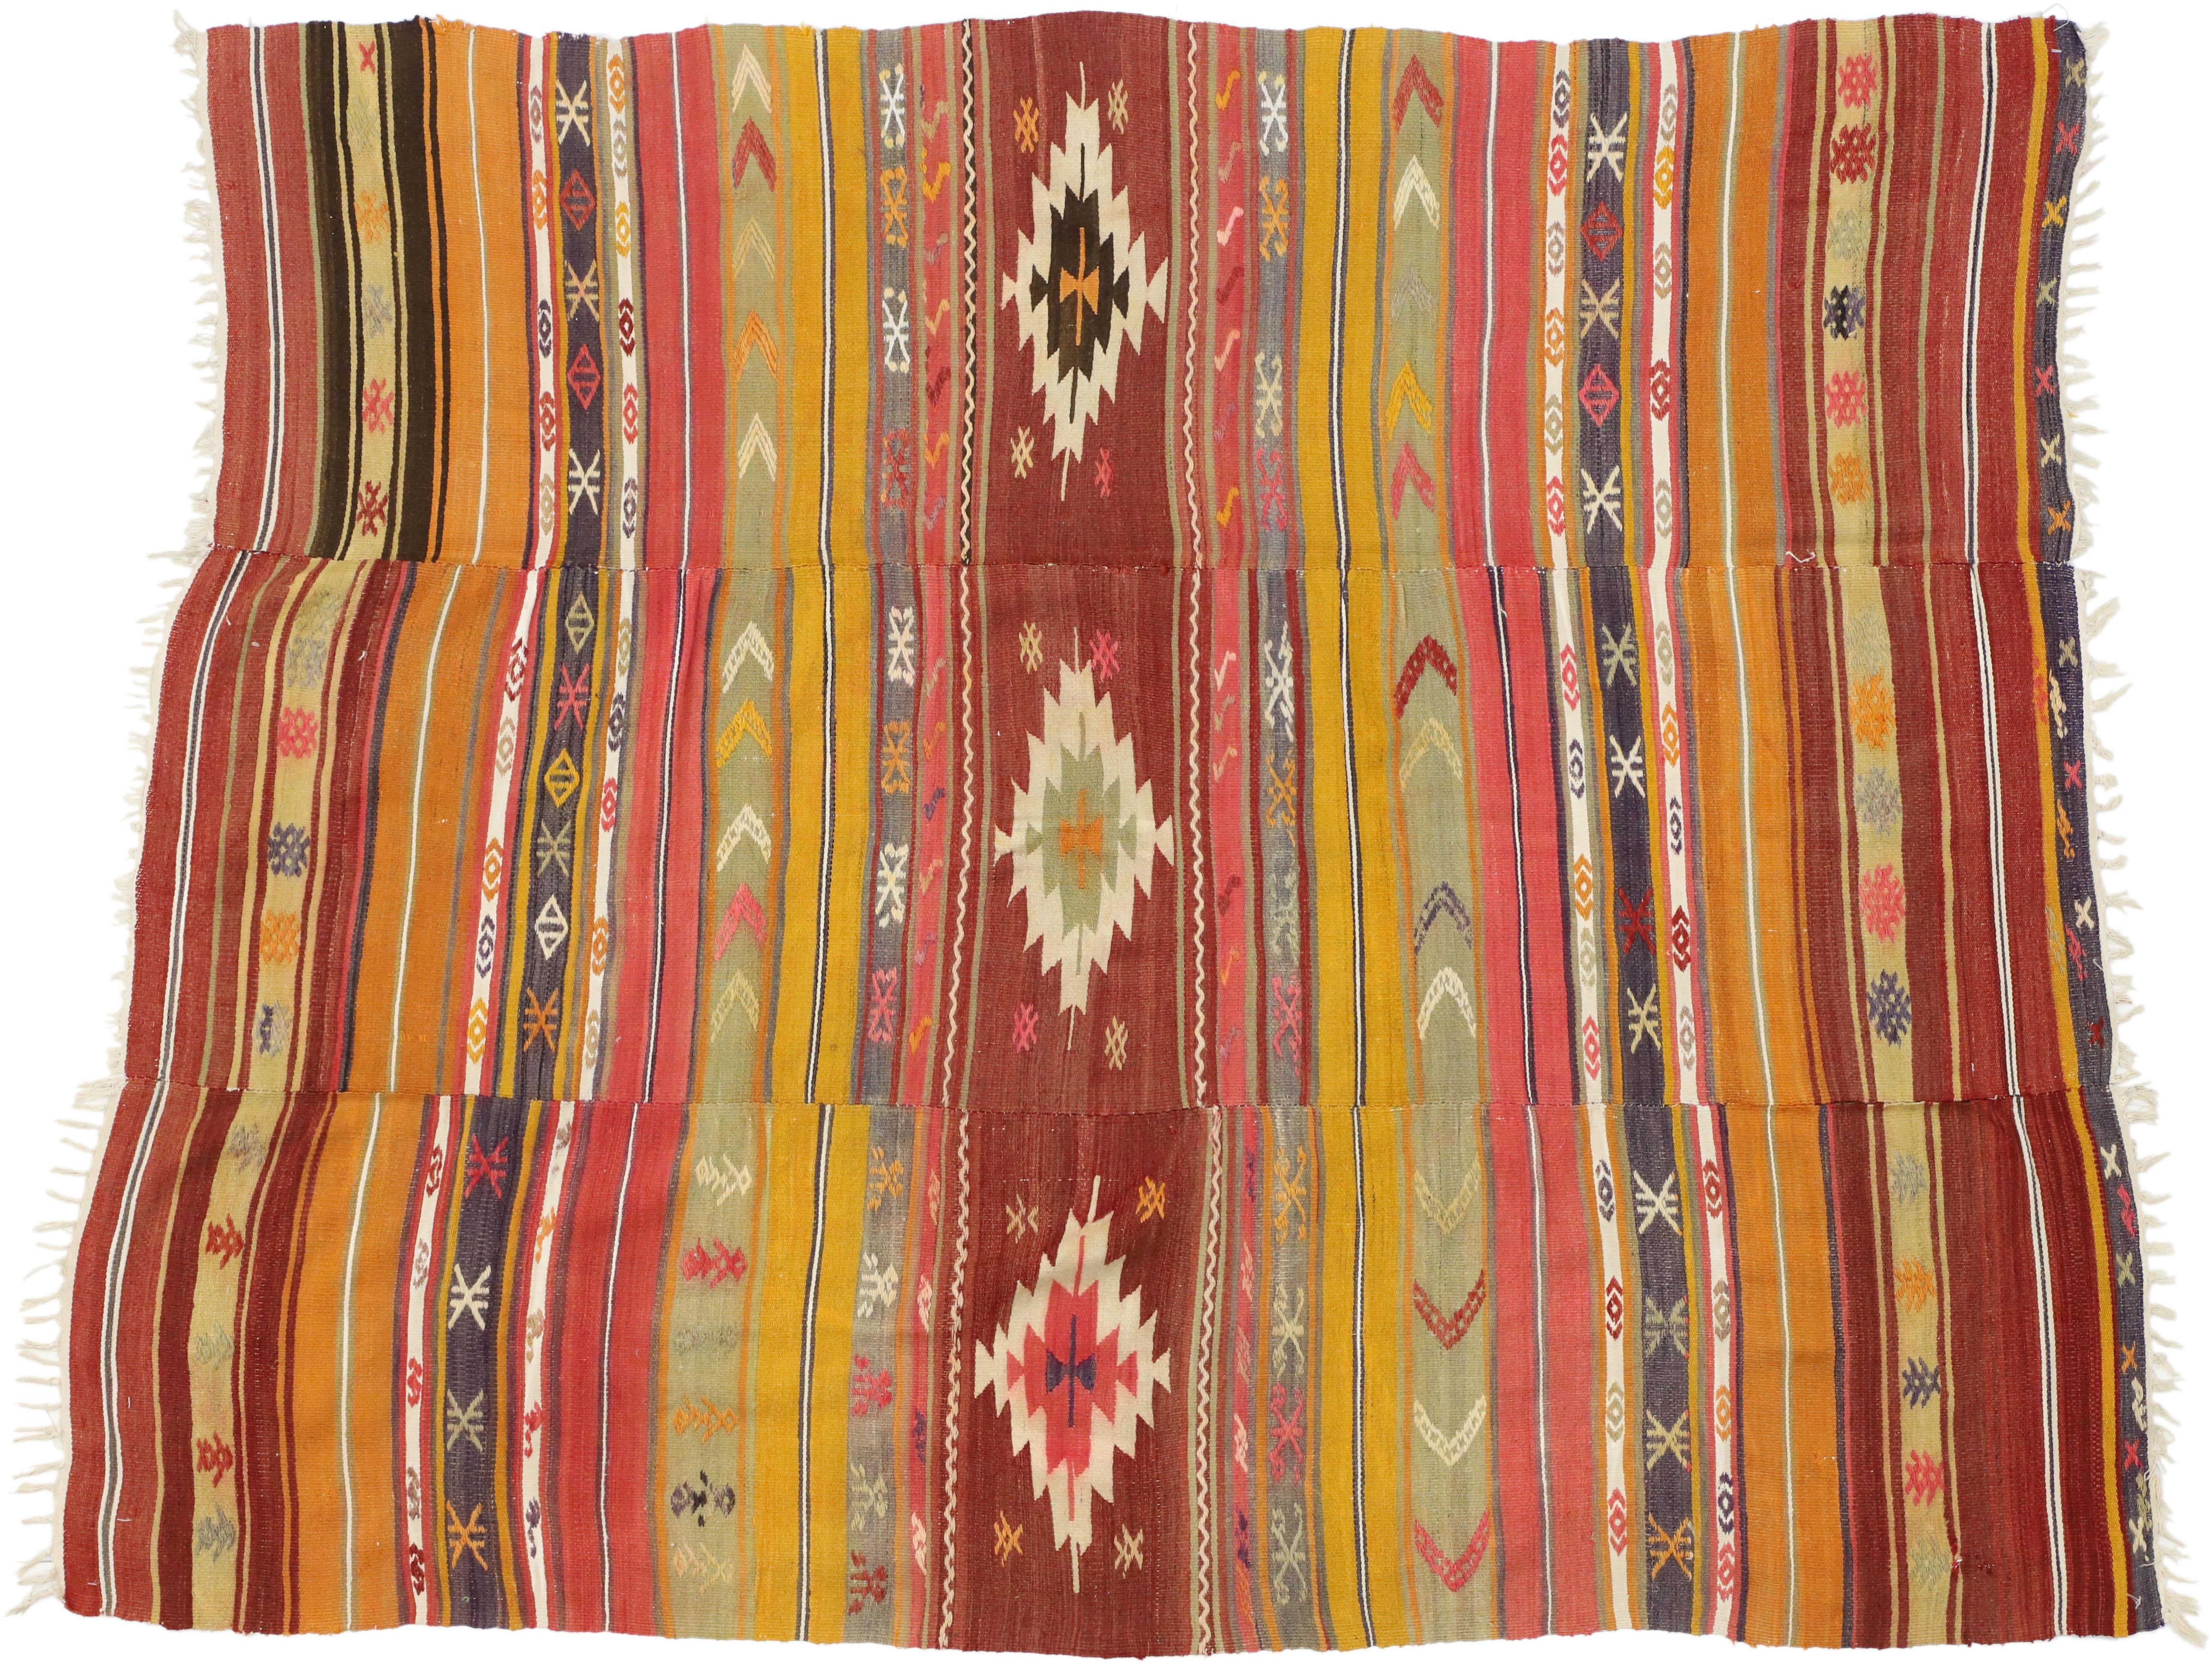 51289 Southwest meets Boho Chic in this vintage Turkish Kilim rug, flat-weave Kilim. This vintage Turkish Kilim rug displays symbolic motifs and bright hues make a statement and create a sense of animation. This Bohemian southwest style Kilim rug is